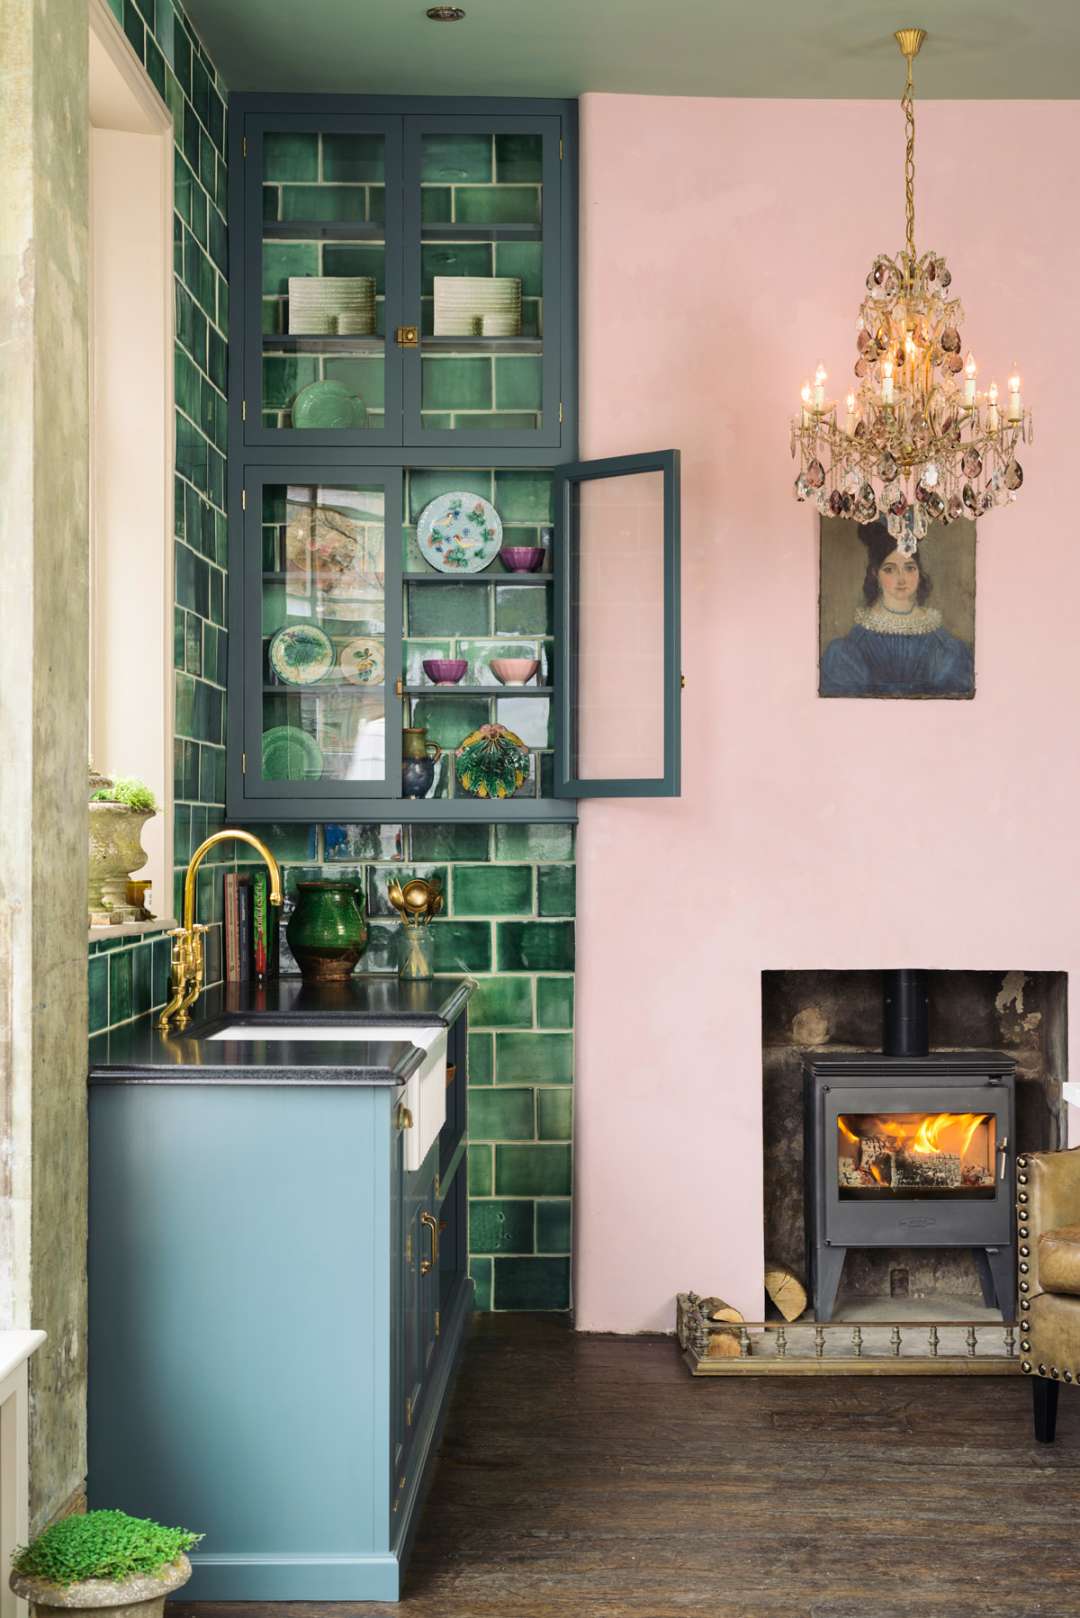 Photos That Will Prove Decorating with Pink and Green is the